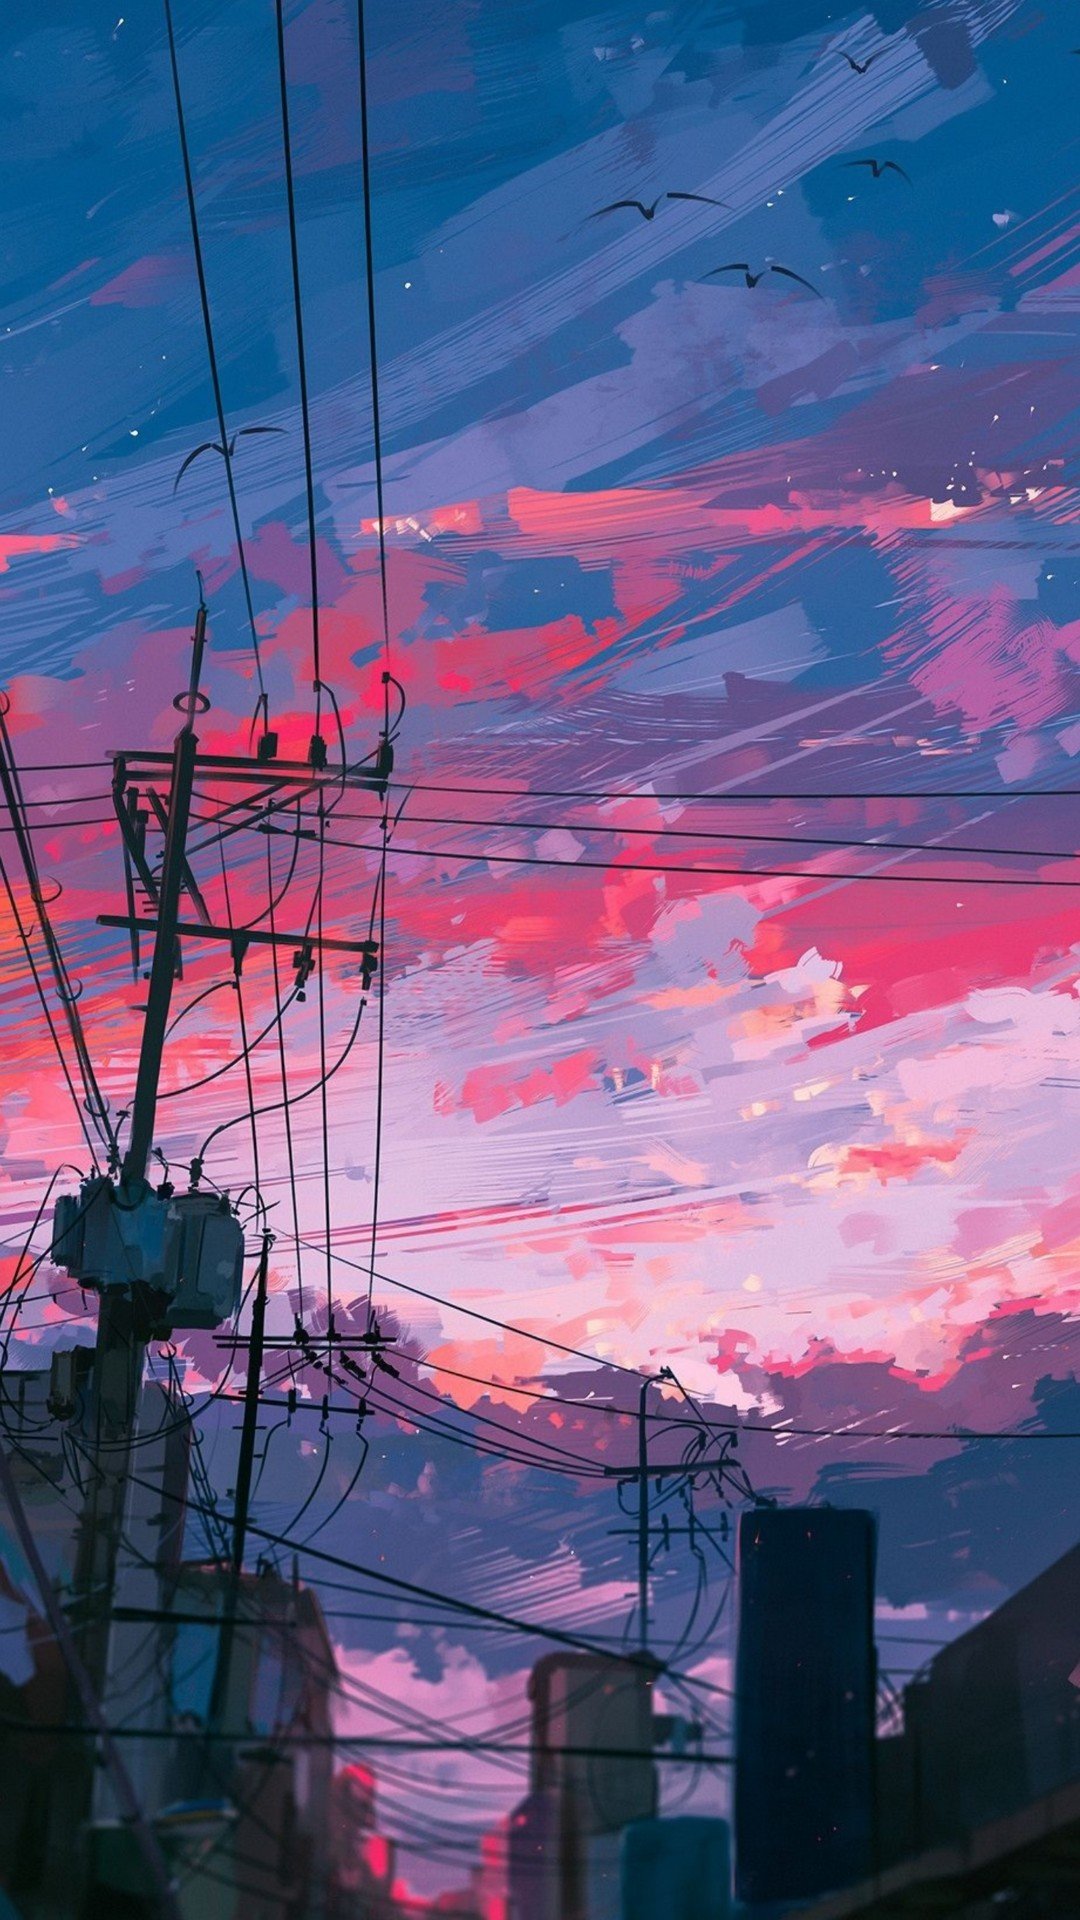 iPhone11papers.com | iPhone11 wallpaper | aw15-arseniy-chebynkin-night-sky -star-blue-illustration-art-anime